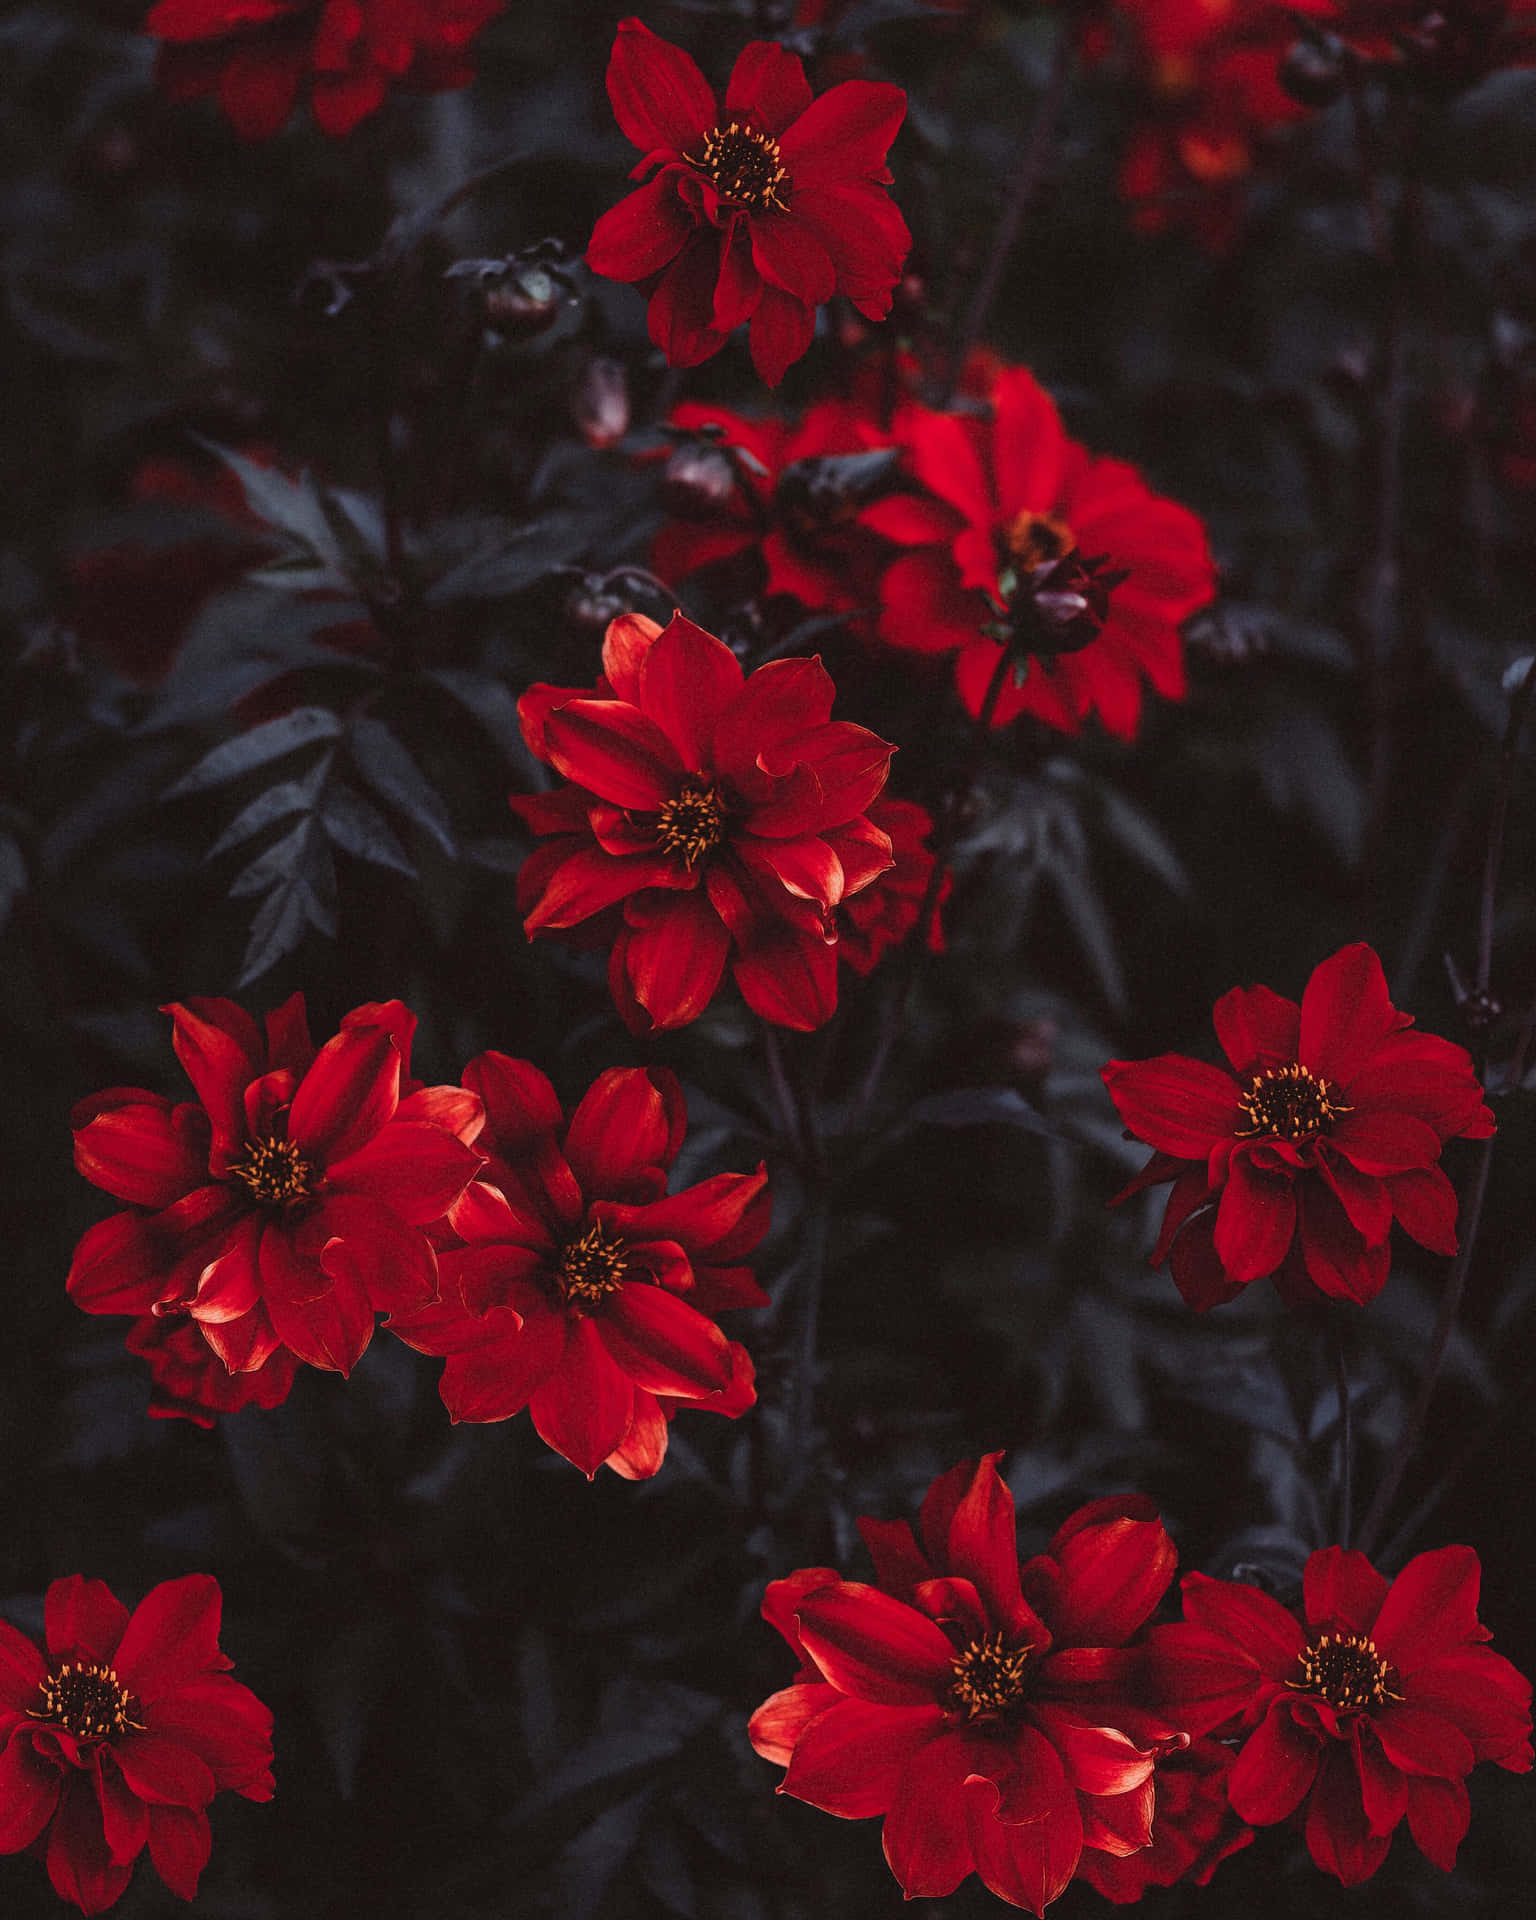 100+] Red Flower Aesthetic Wallpapers | Wallpapers.com